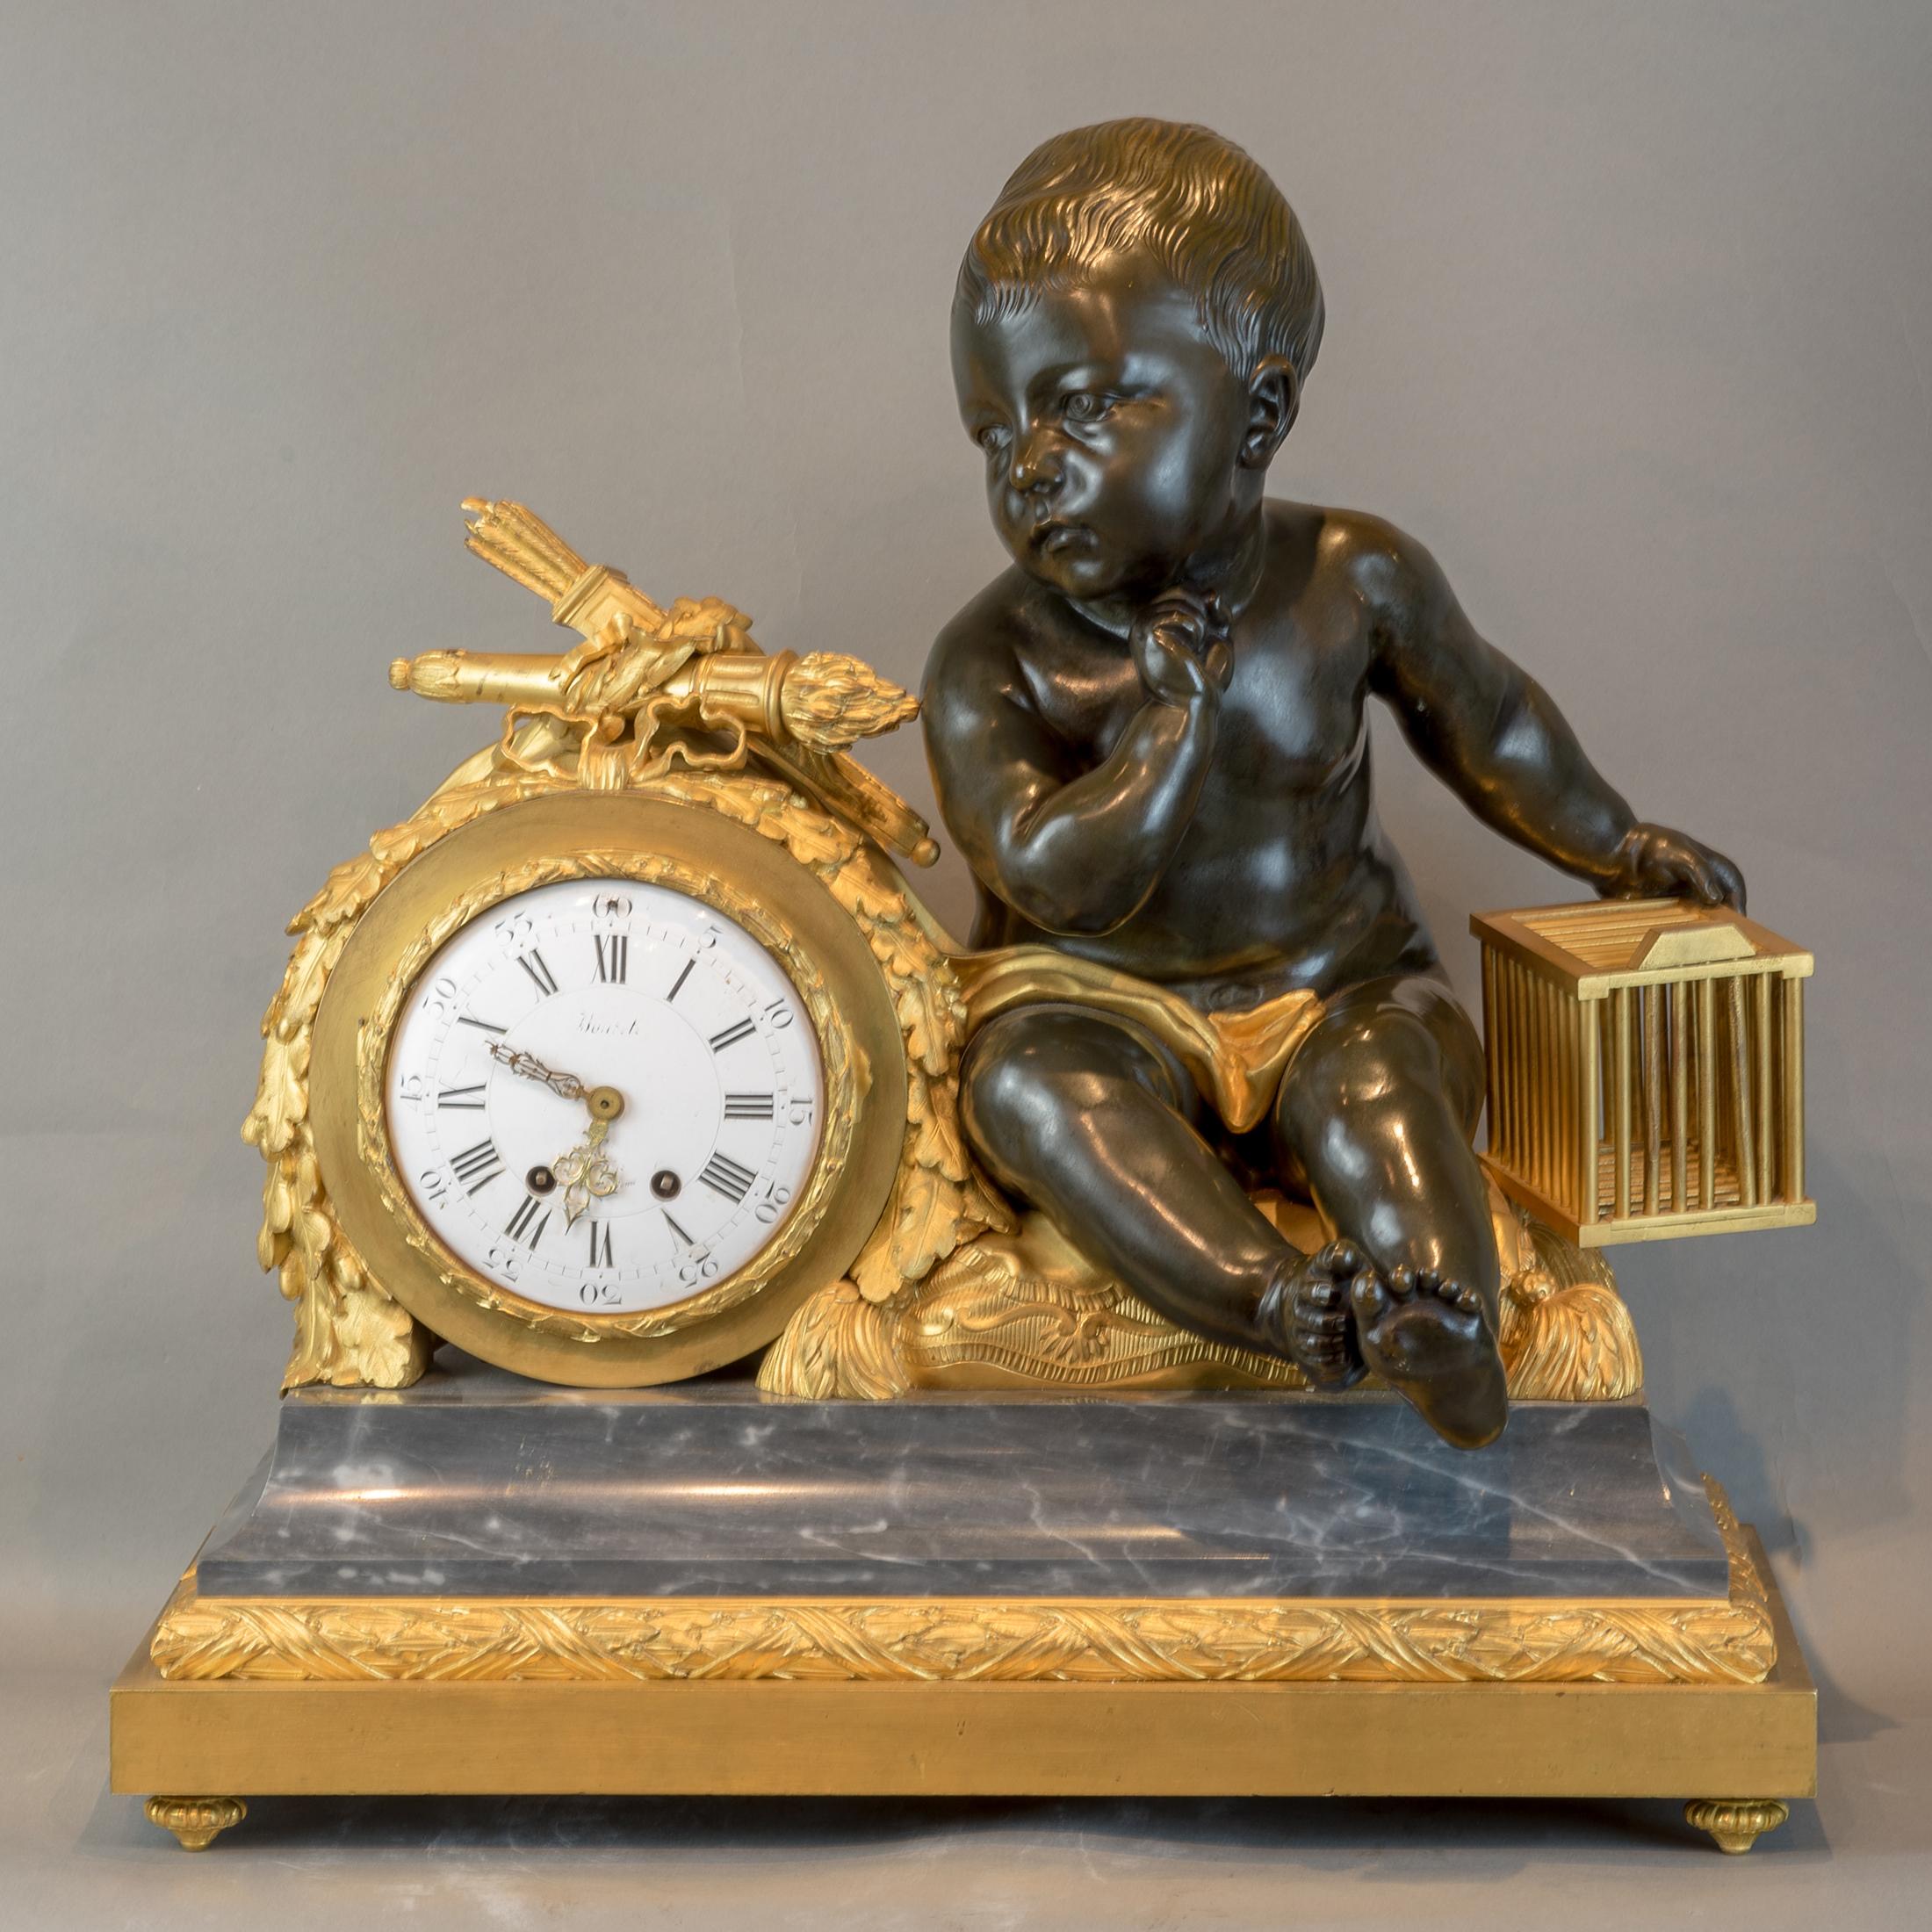 The mantel clock with a seated putto and birdcage. 

Maker: Alfred-Emmanuel Beurdeley (French, 1847-1919)
Origin: French
Date: 19th century
Dimension: 26 in. x 13 1/2 in.